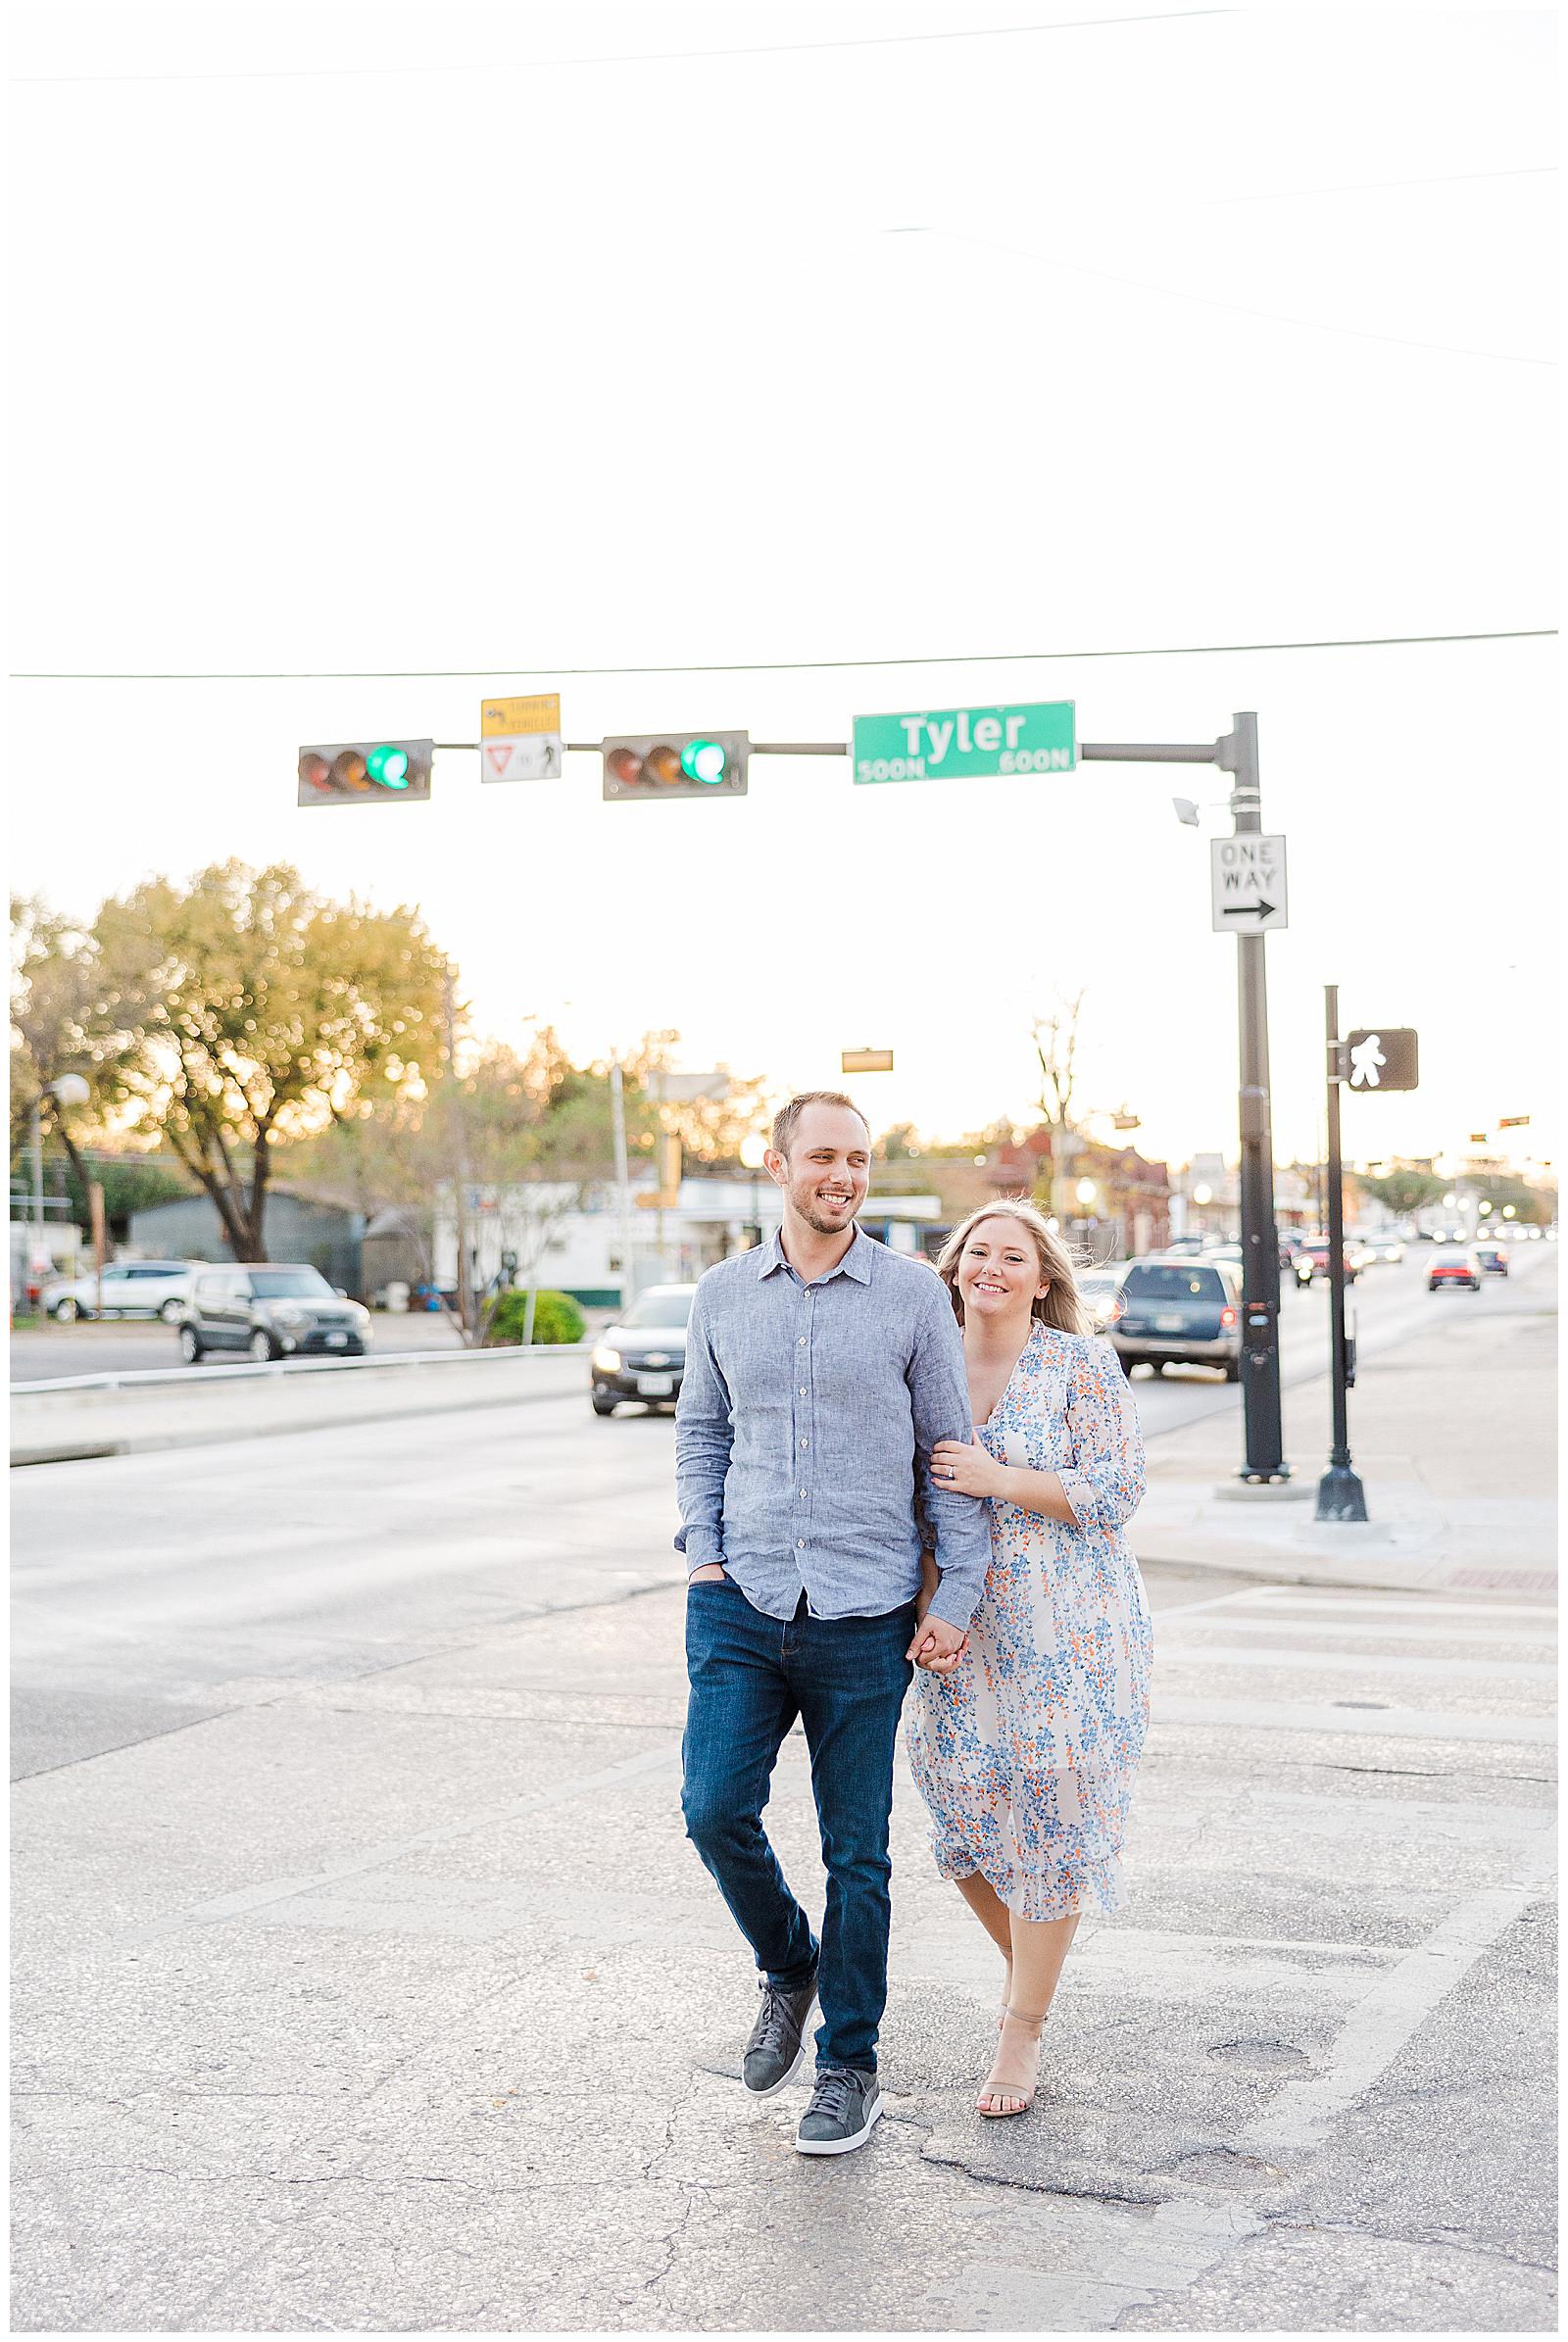 Lindsey and Chris' Dallas Engagement Session